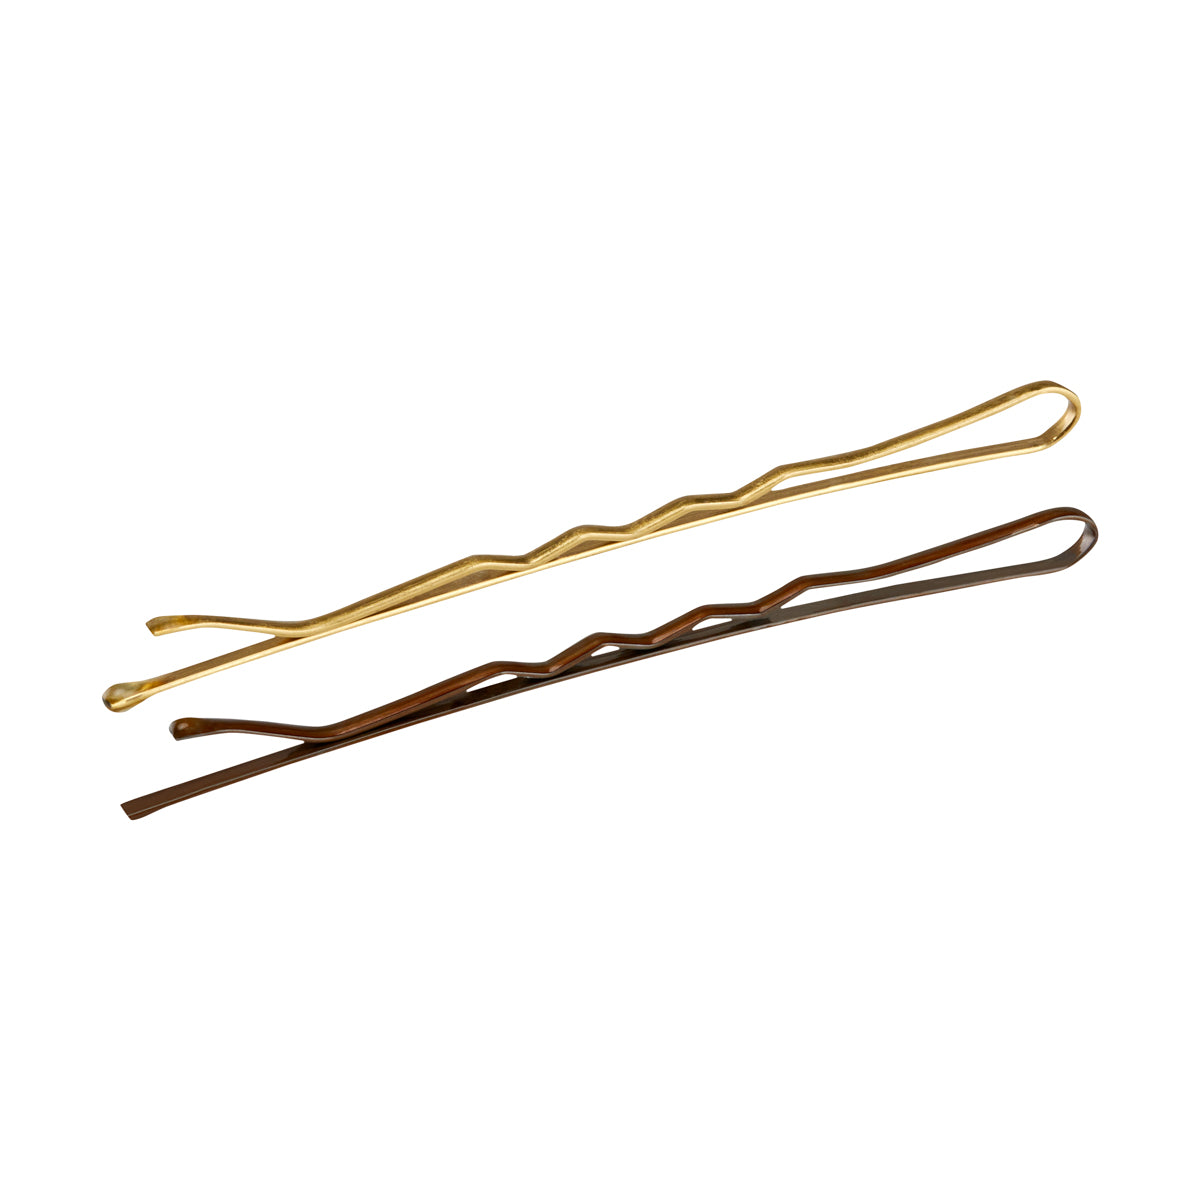 ACTIVESHOP HAIRDRESSING PINS FOR HAIR E-64 50 PCS 6 CM GOLD BROWN MIX